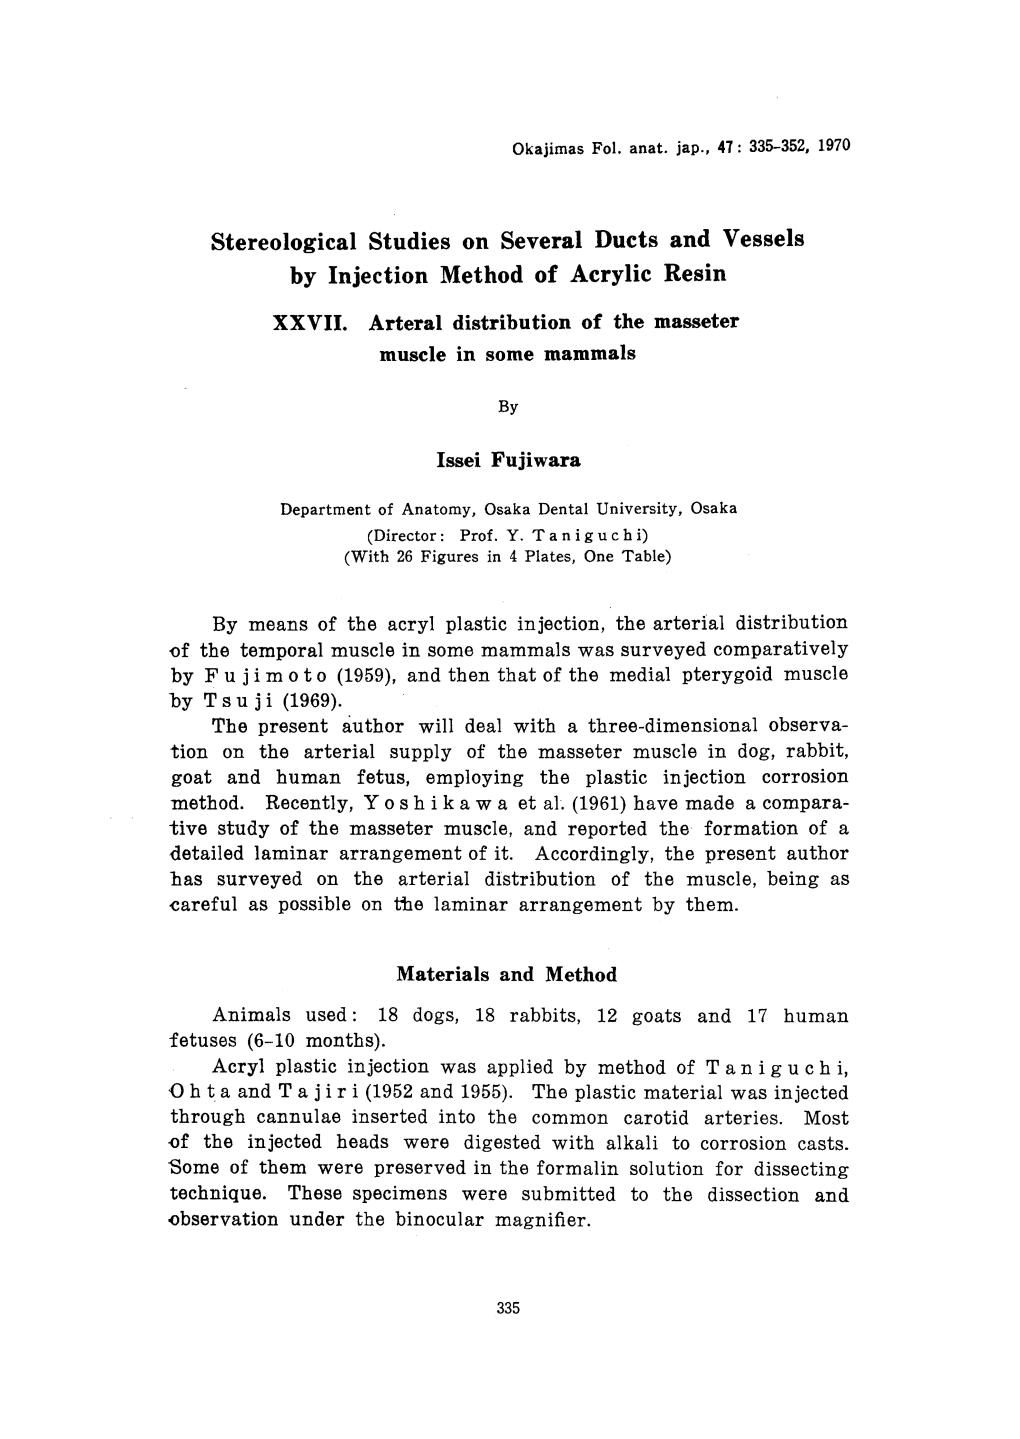 335-352, 1970 Stereological Studies on Several Ducts and Vessels by Injection Method of Acrylic R